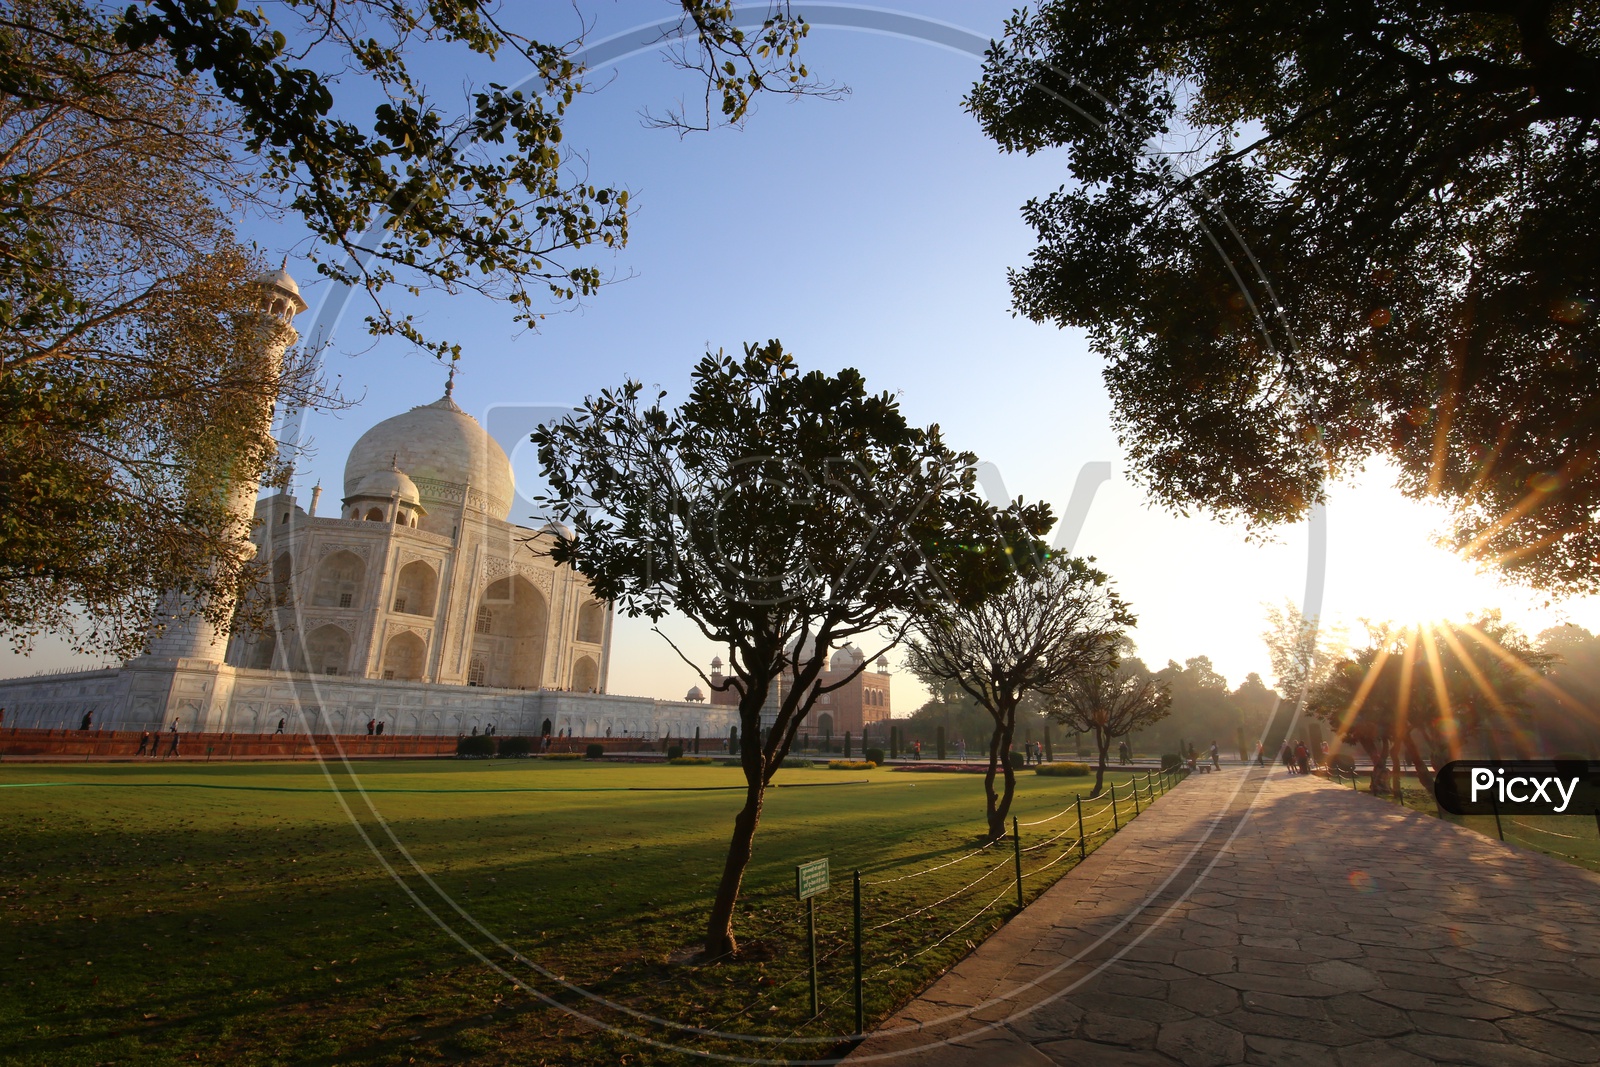 Landscape of Taj Mahal with tree in the foreground